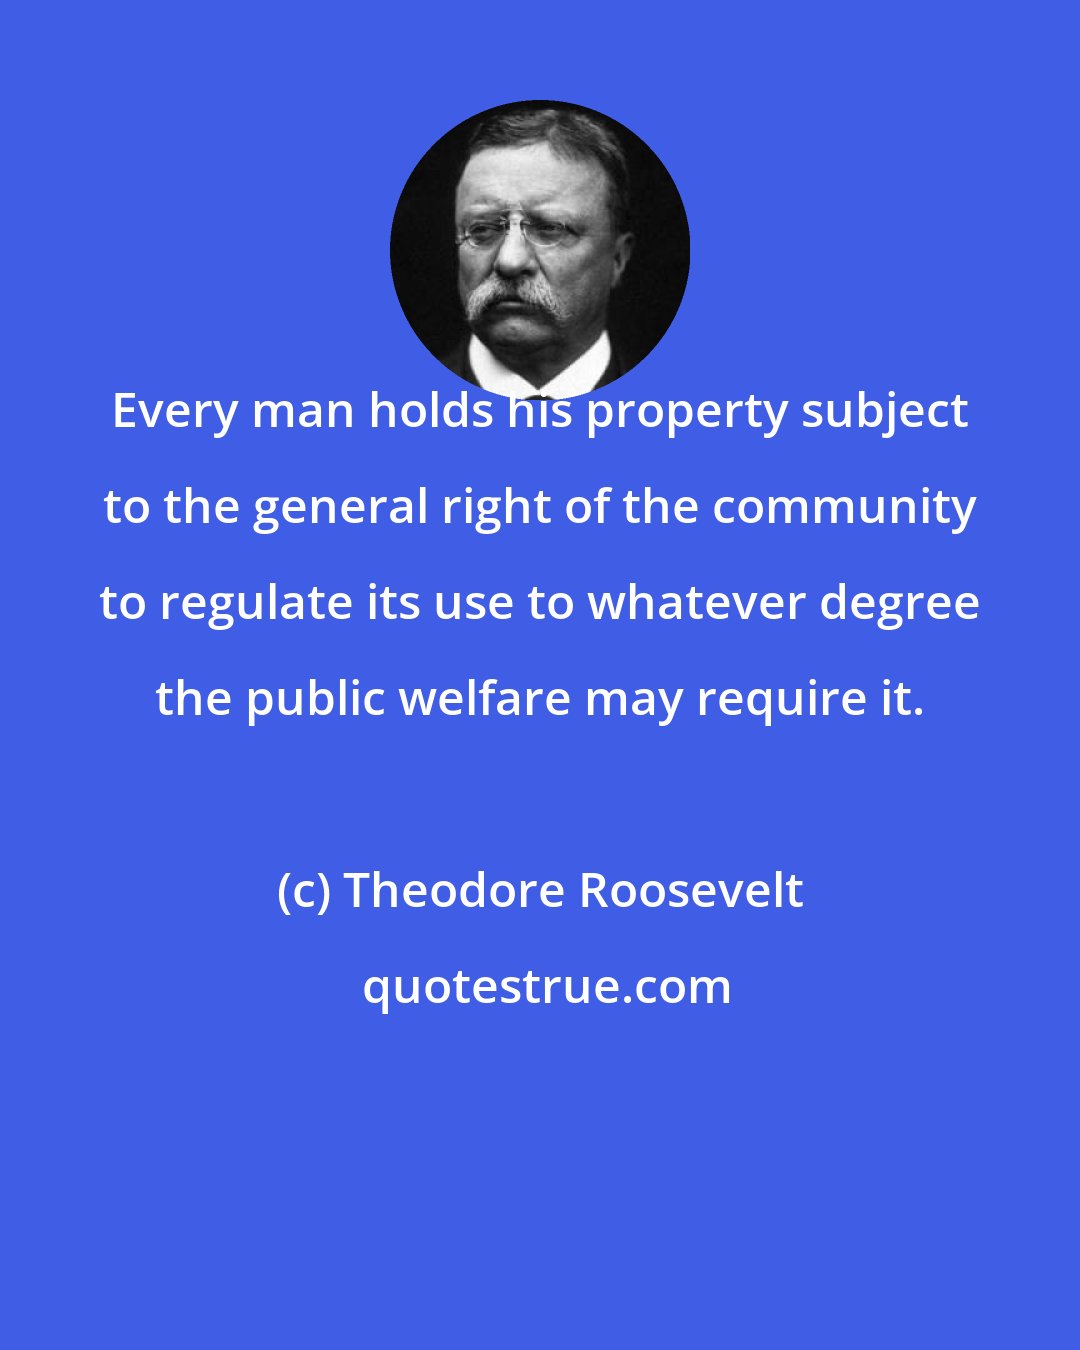 Theodore Roosevelt: Every man holds his property subject to the general right of the community to regulate its use to whatever degree the public welfare may require it.